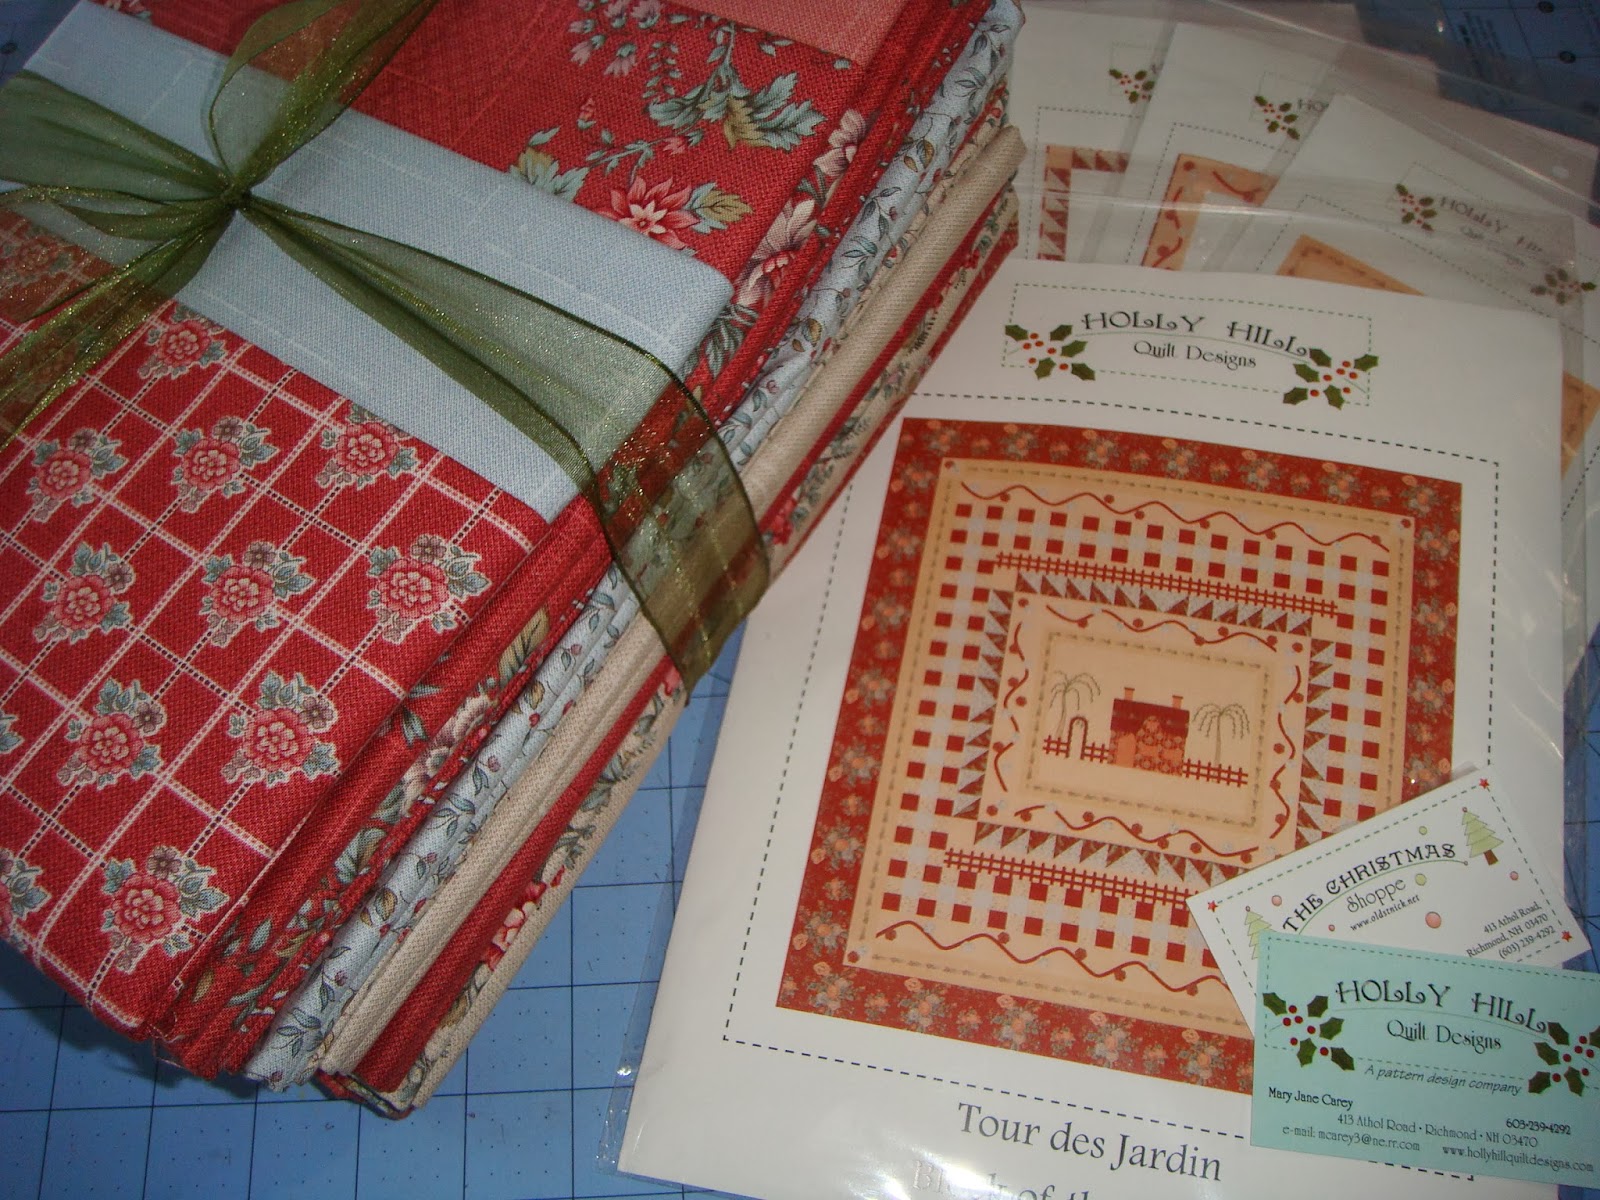 Holly Hill Quilt Designs